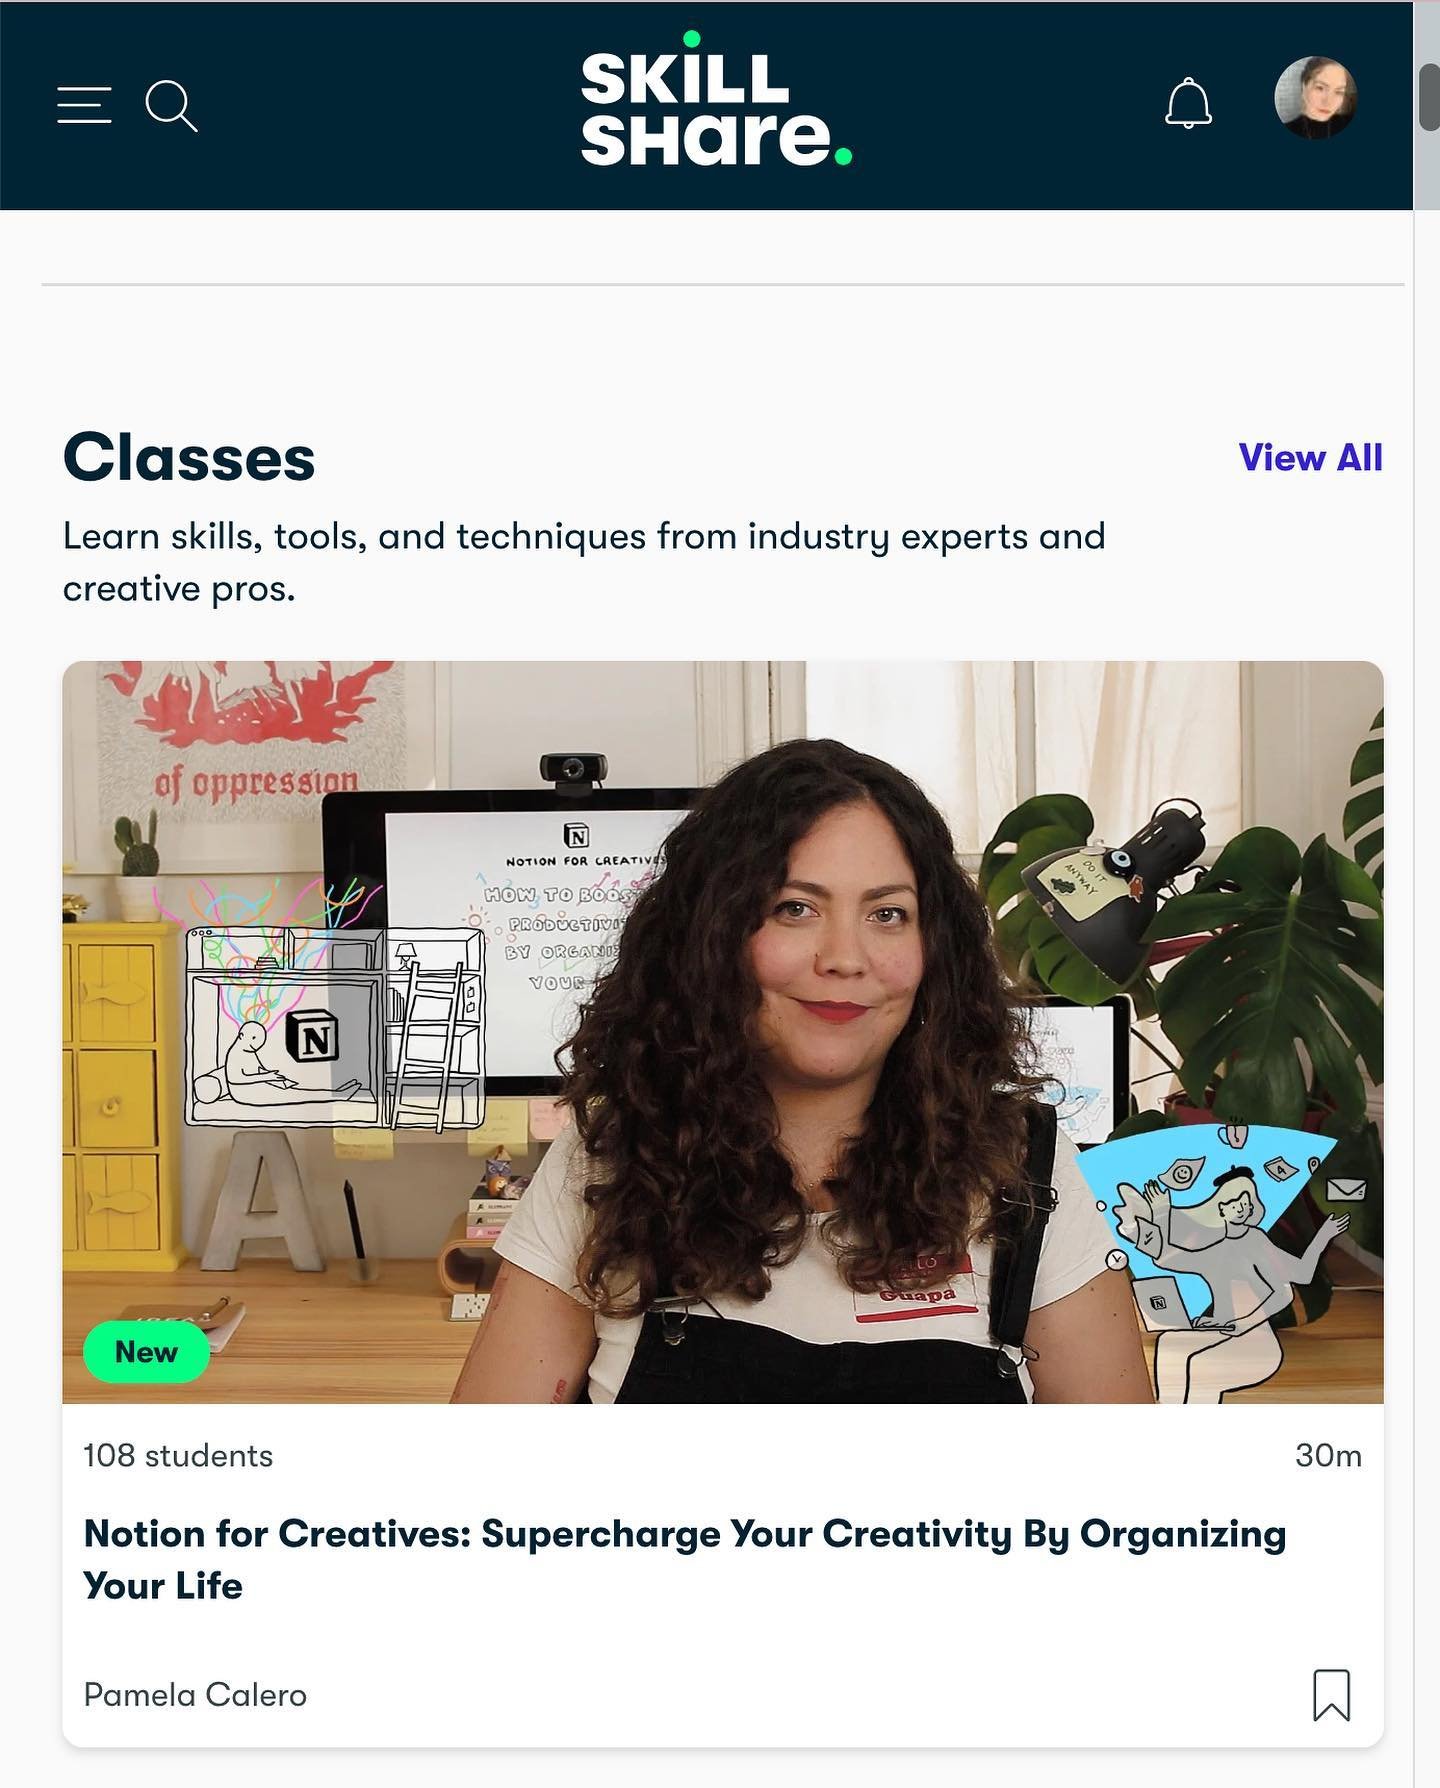 Exciting news! 🎉 My latest class, &ldquo;Notion for Creatives: Supercharge Your Creativity By Organizing Your Life,&rdquo; is now featured on @skillshare holding the top spot in both the Productivity and Notion sections! This placement increases the